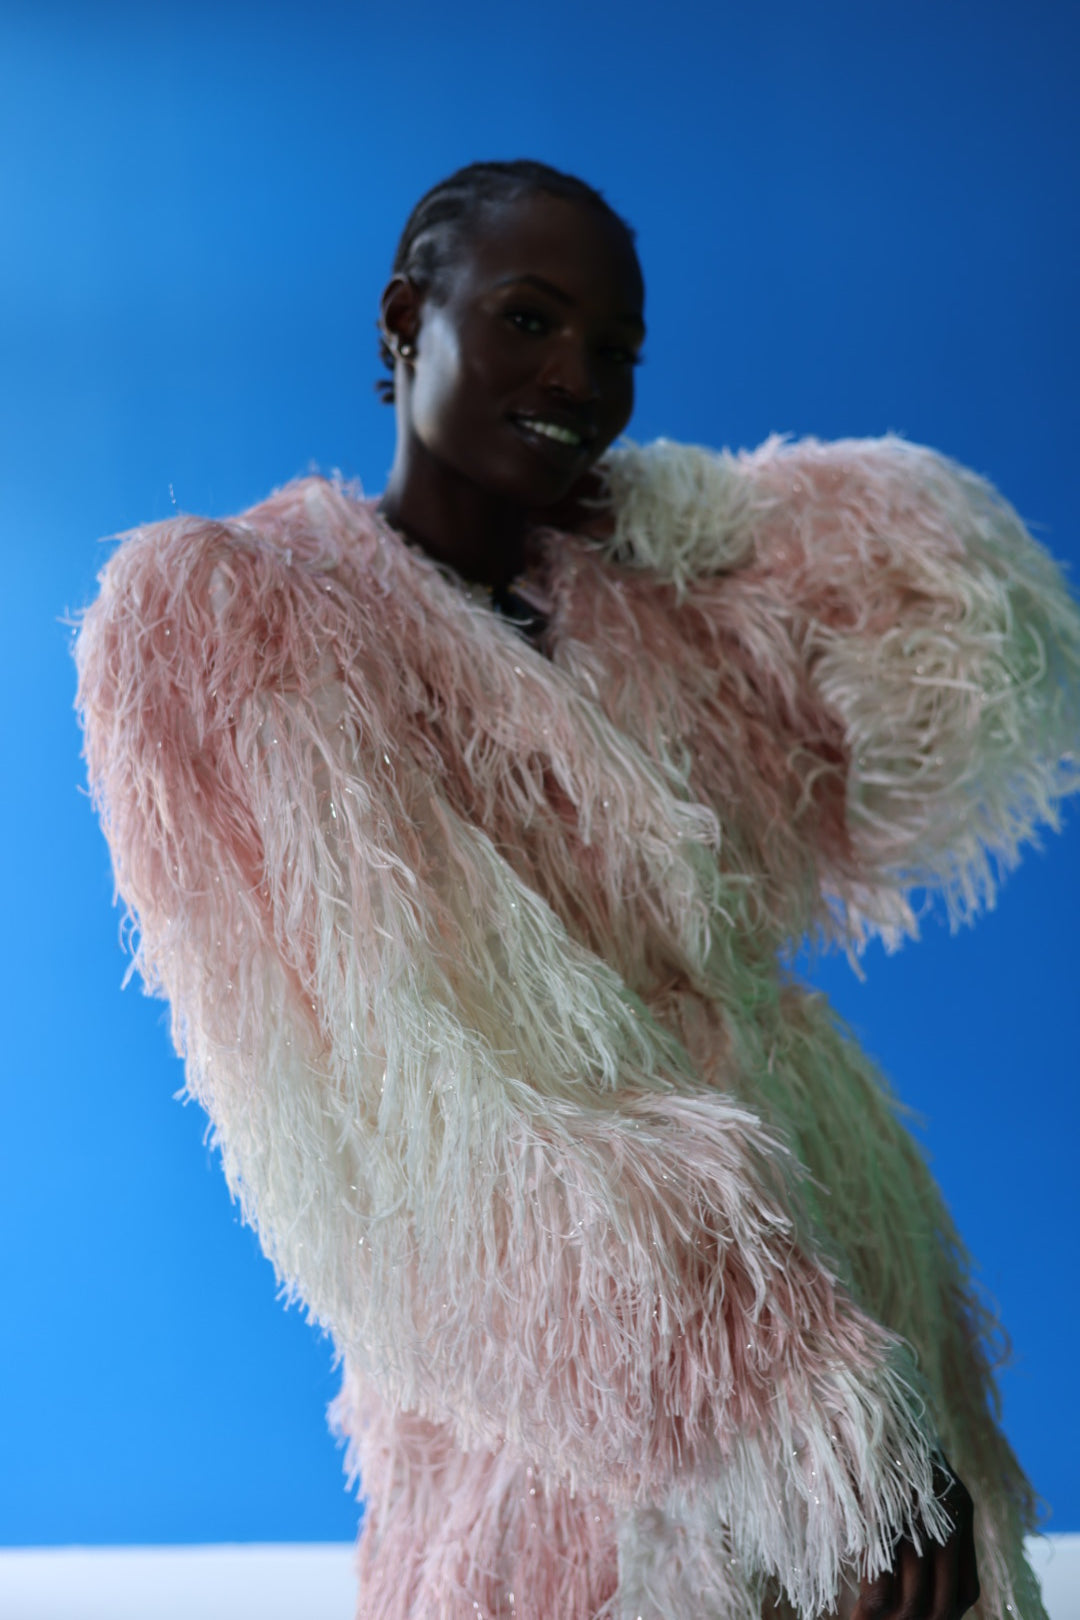 The Shaggy Brigitte Coat has an ombre effect from light pink to creamy white. The faux fur adds a playful touch.